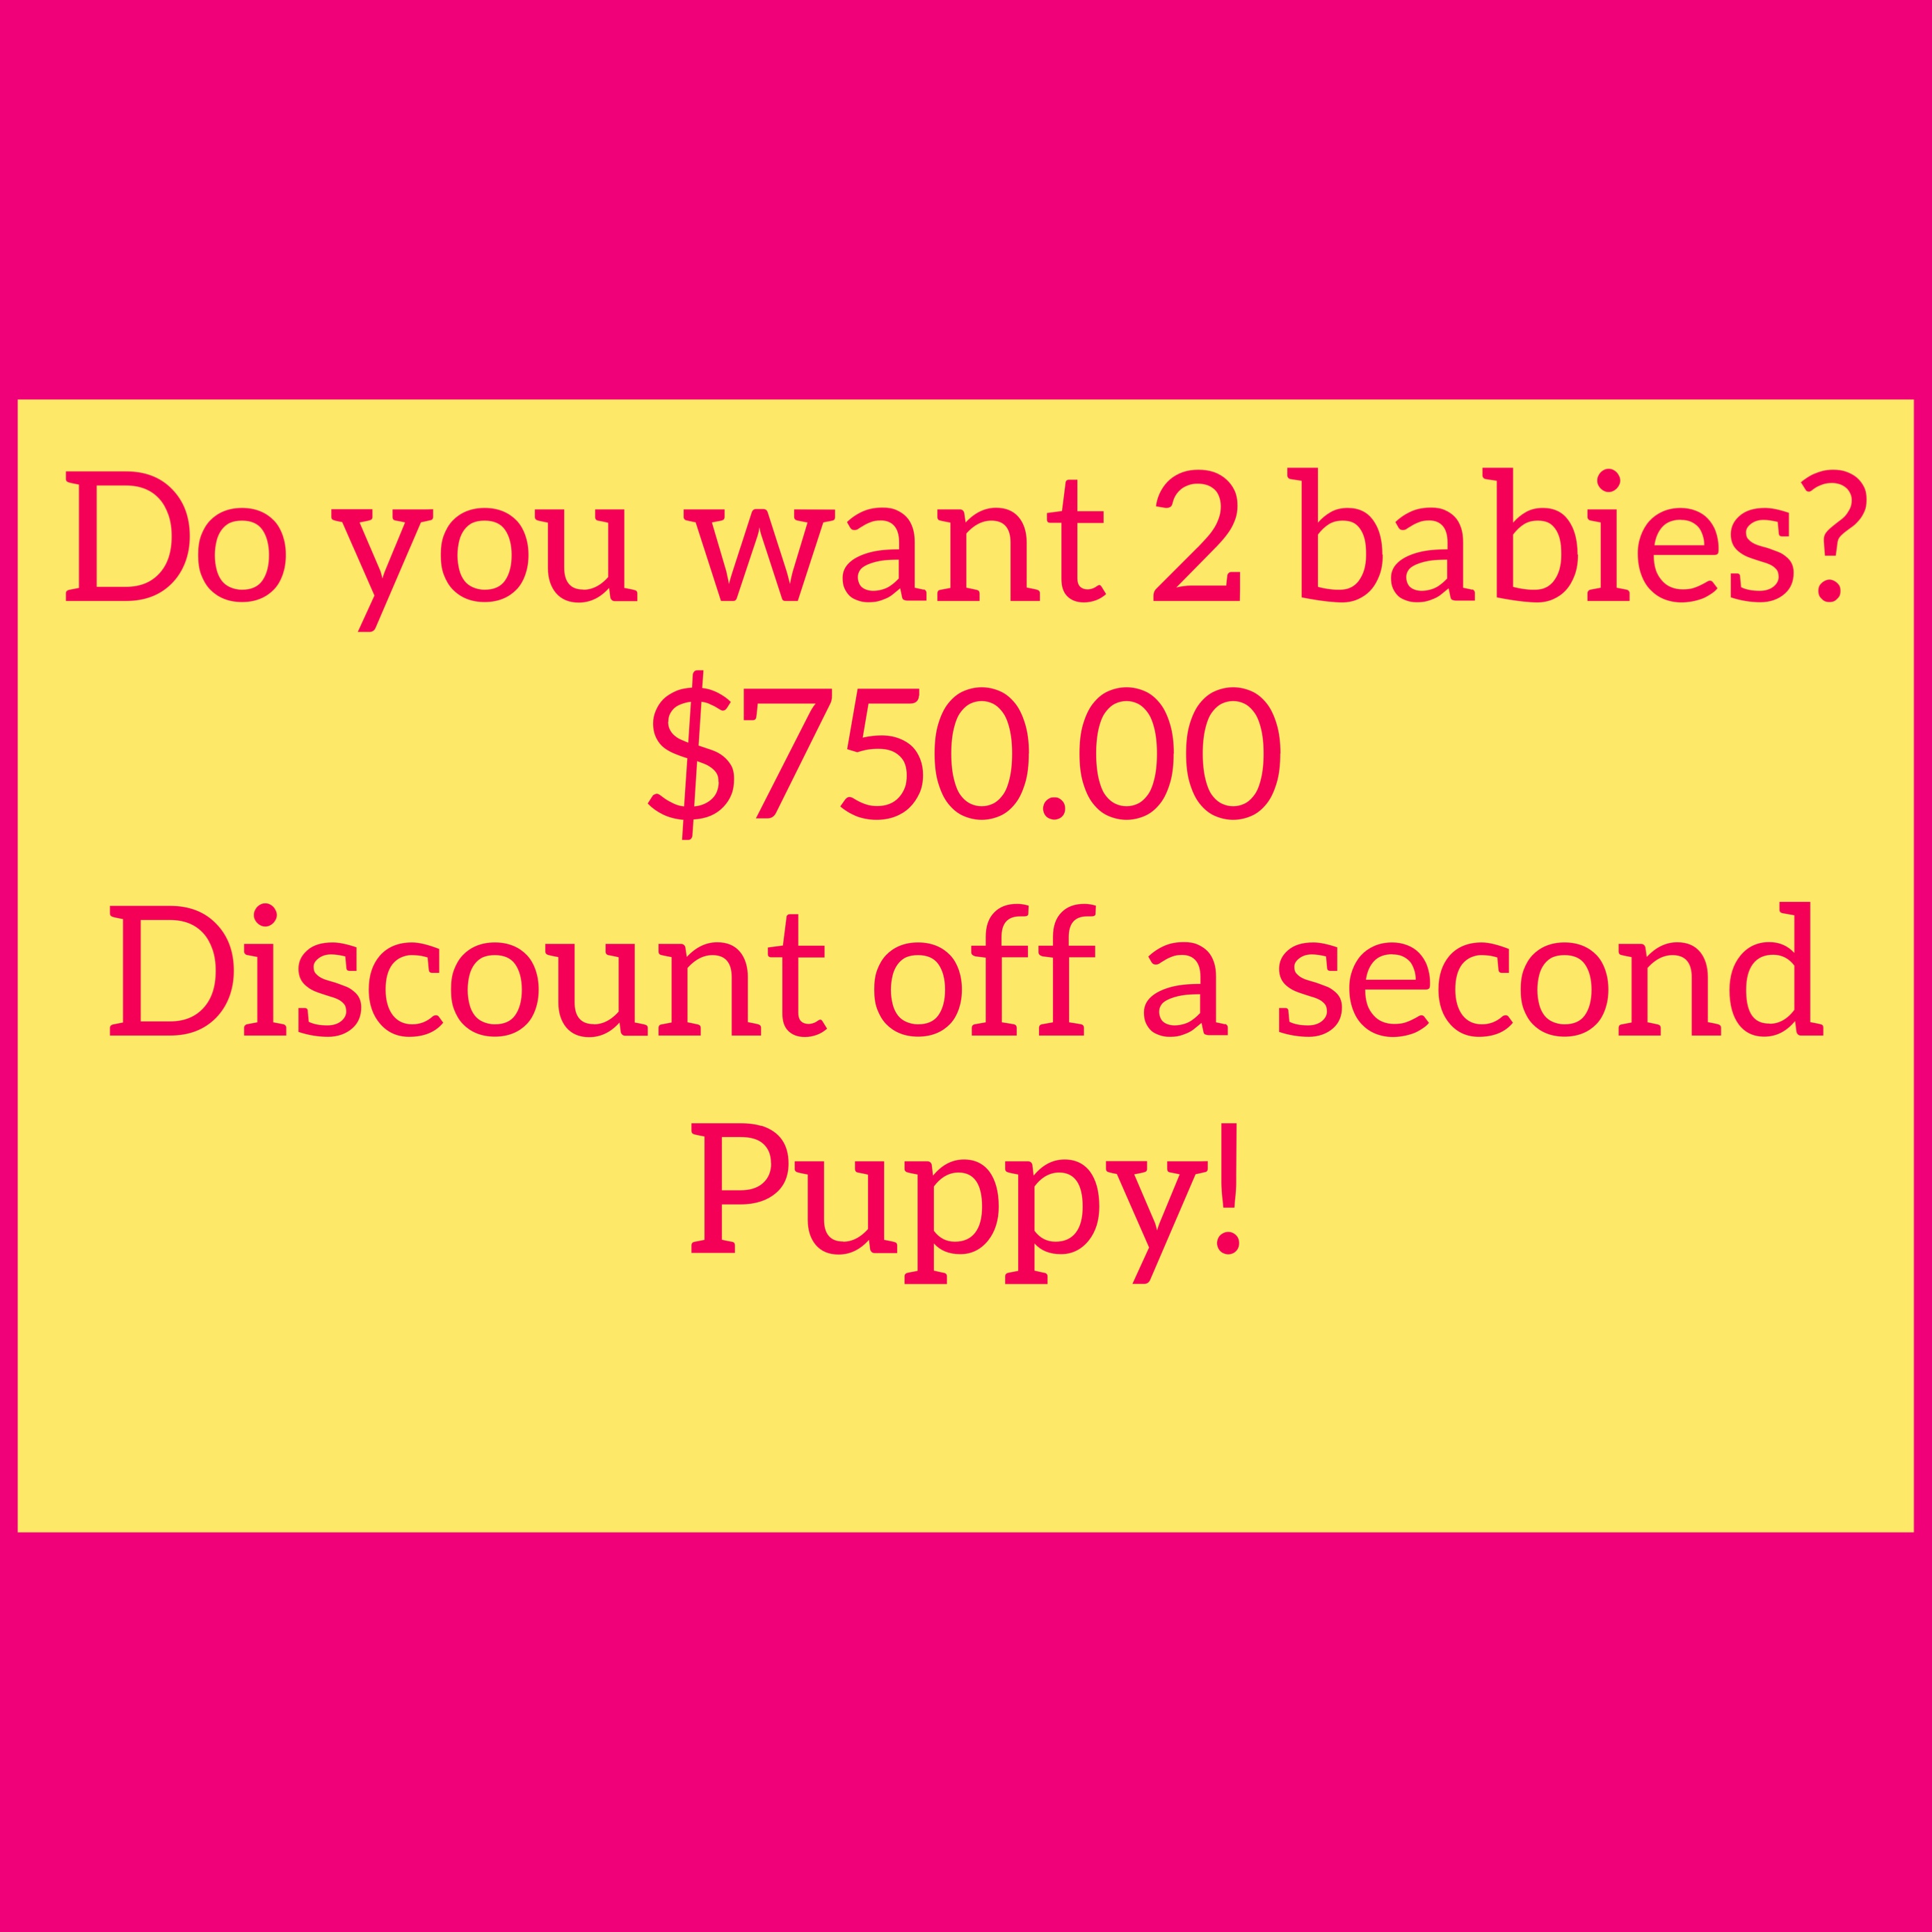 Do you want 2 babies? Click here to find out more!